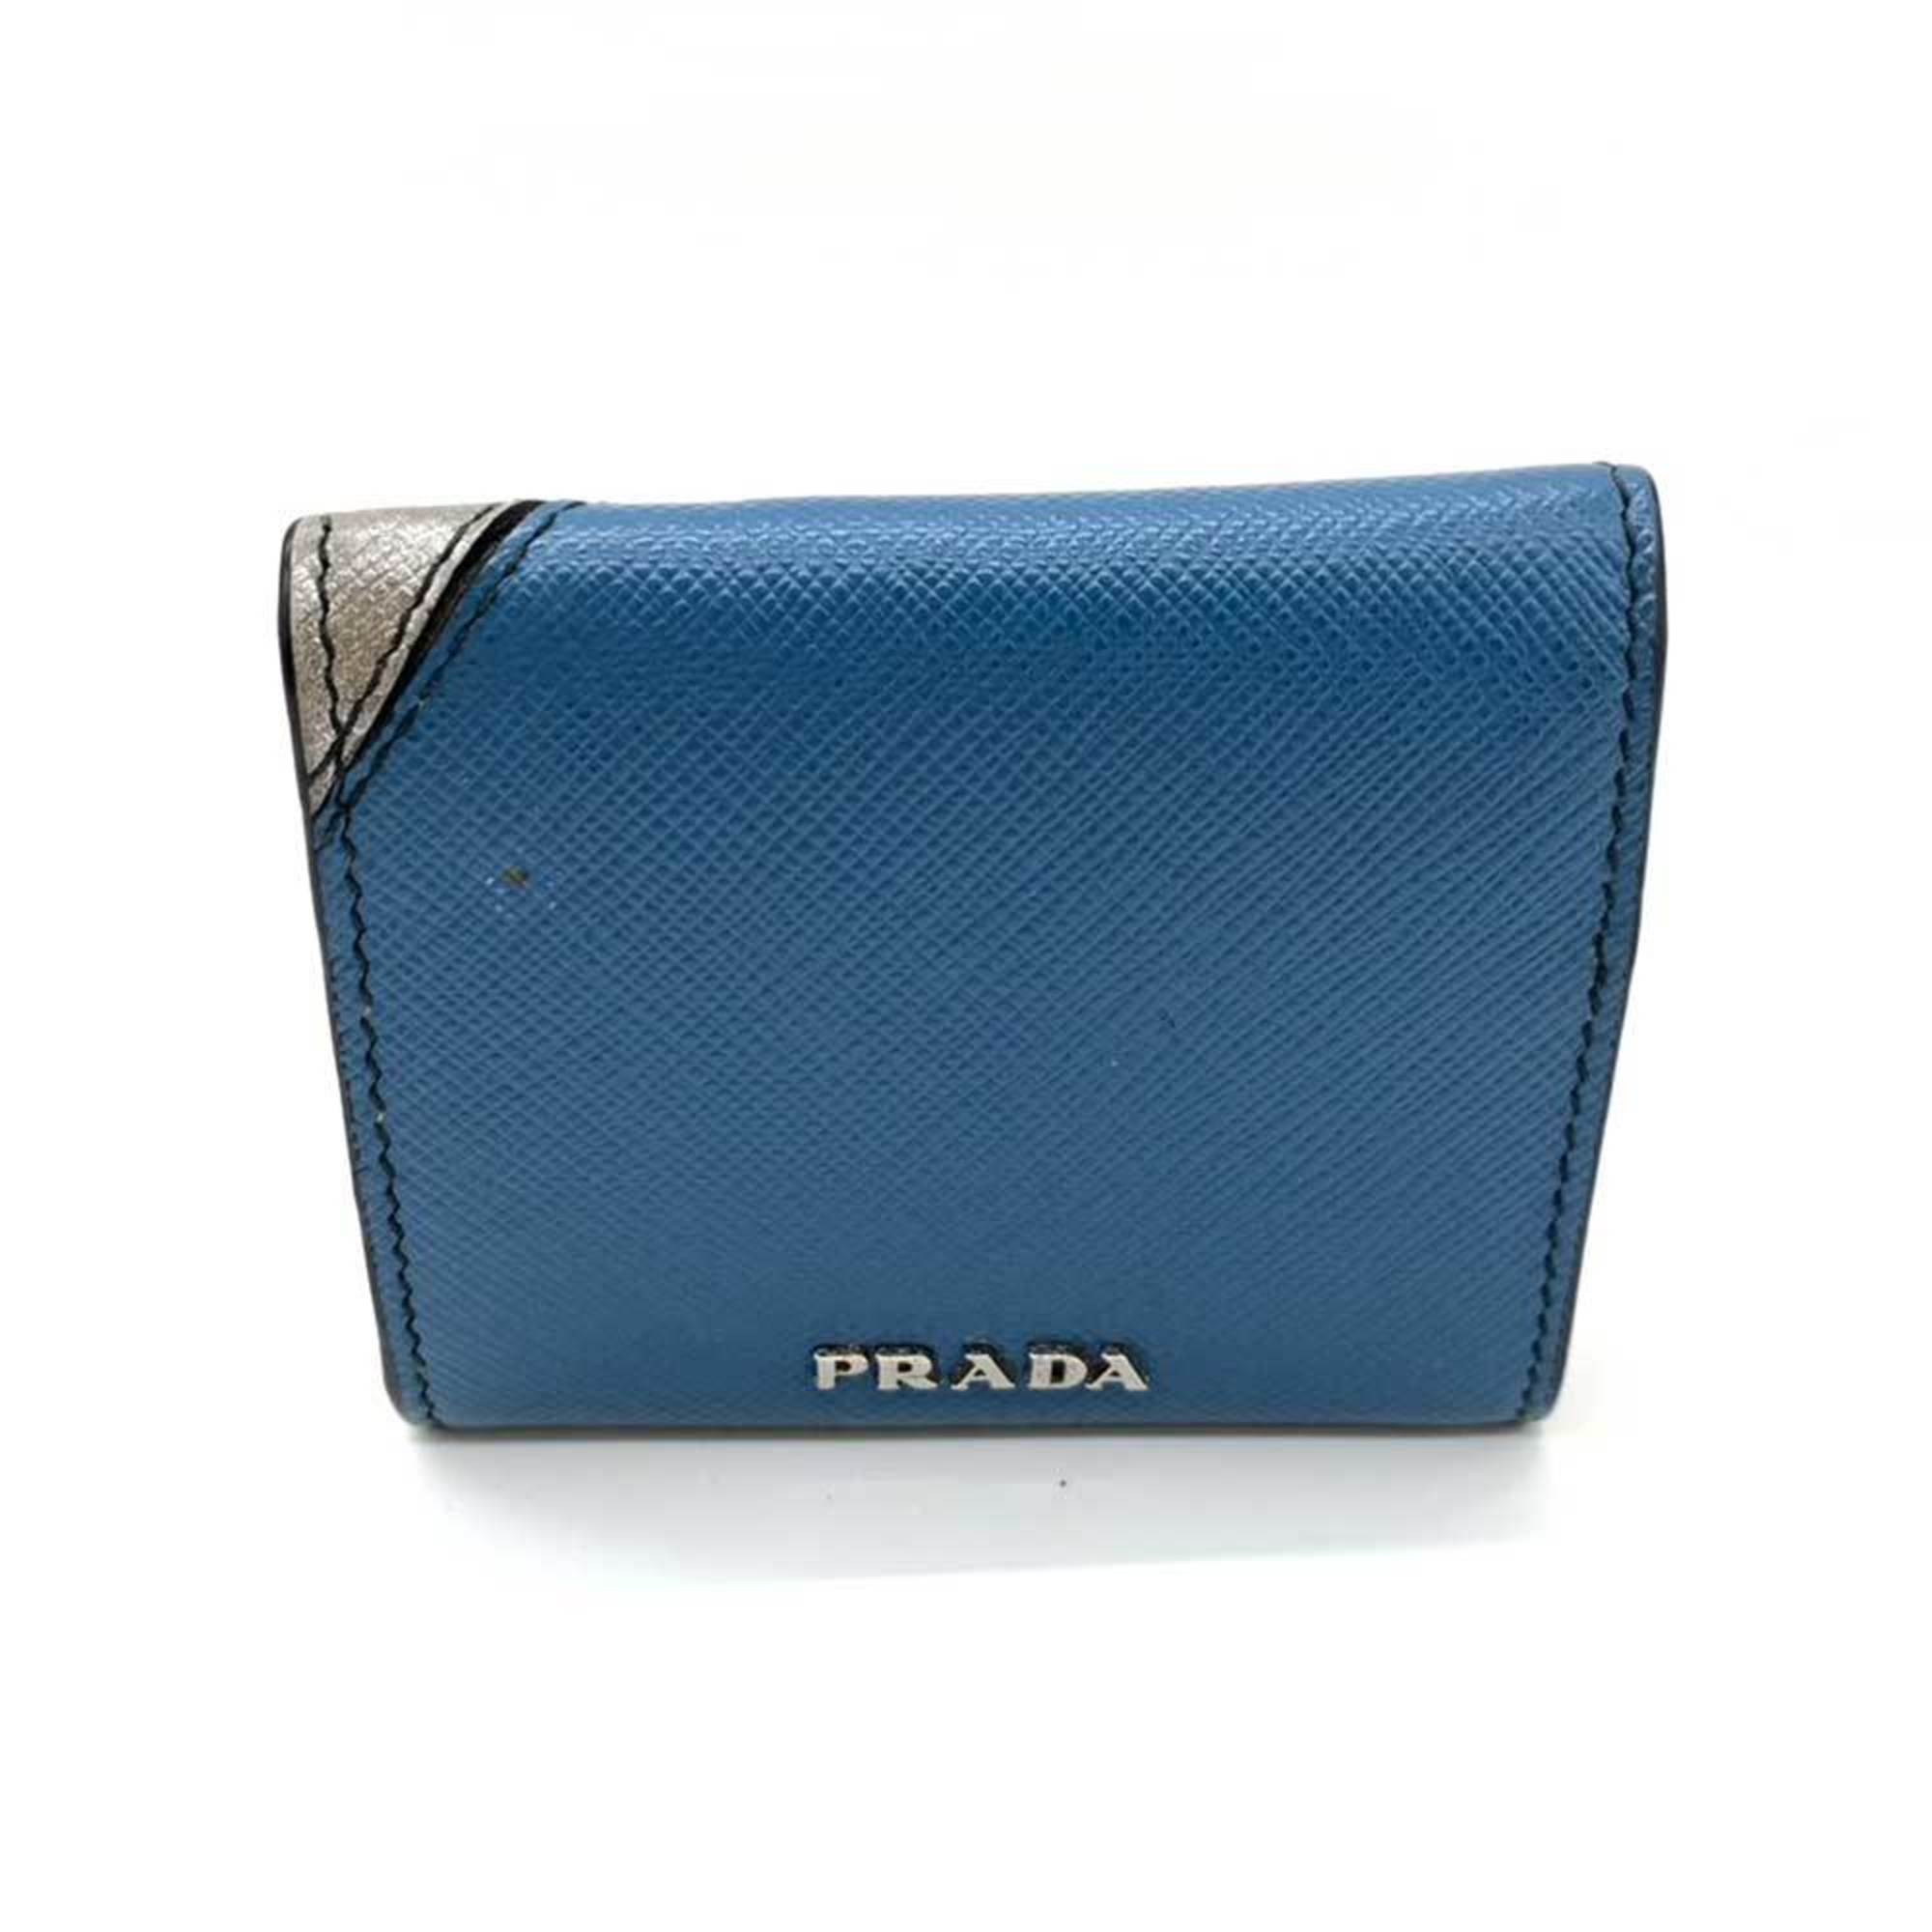 PRADA Wallet Robot Wallet/Coin Case Blue x Yellow Silver Color Metallic Coin Purse Square Studs Ladies Men's Saffiano Leather 2MM935